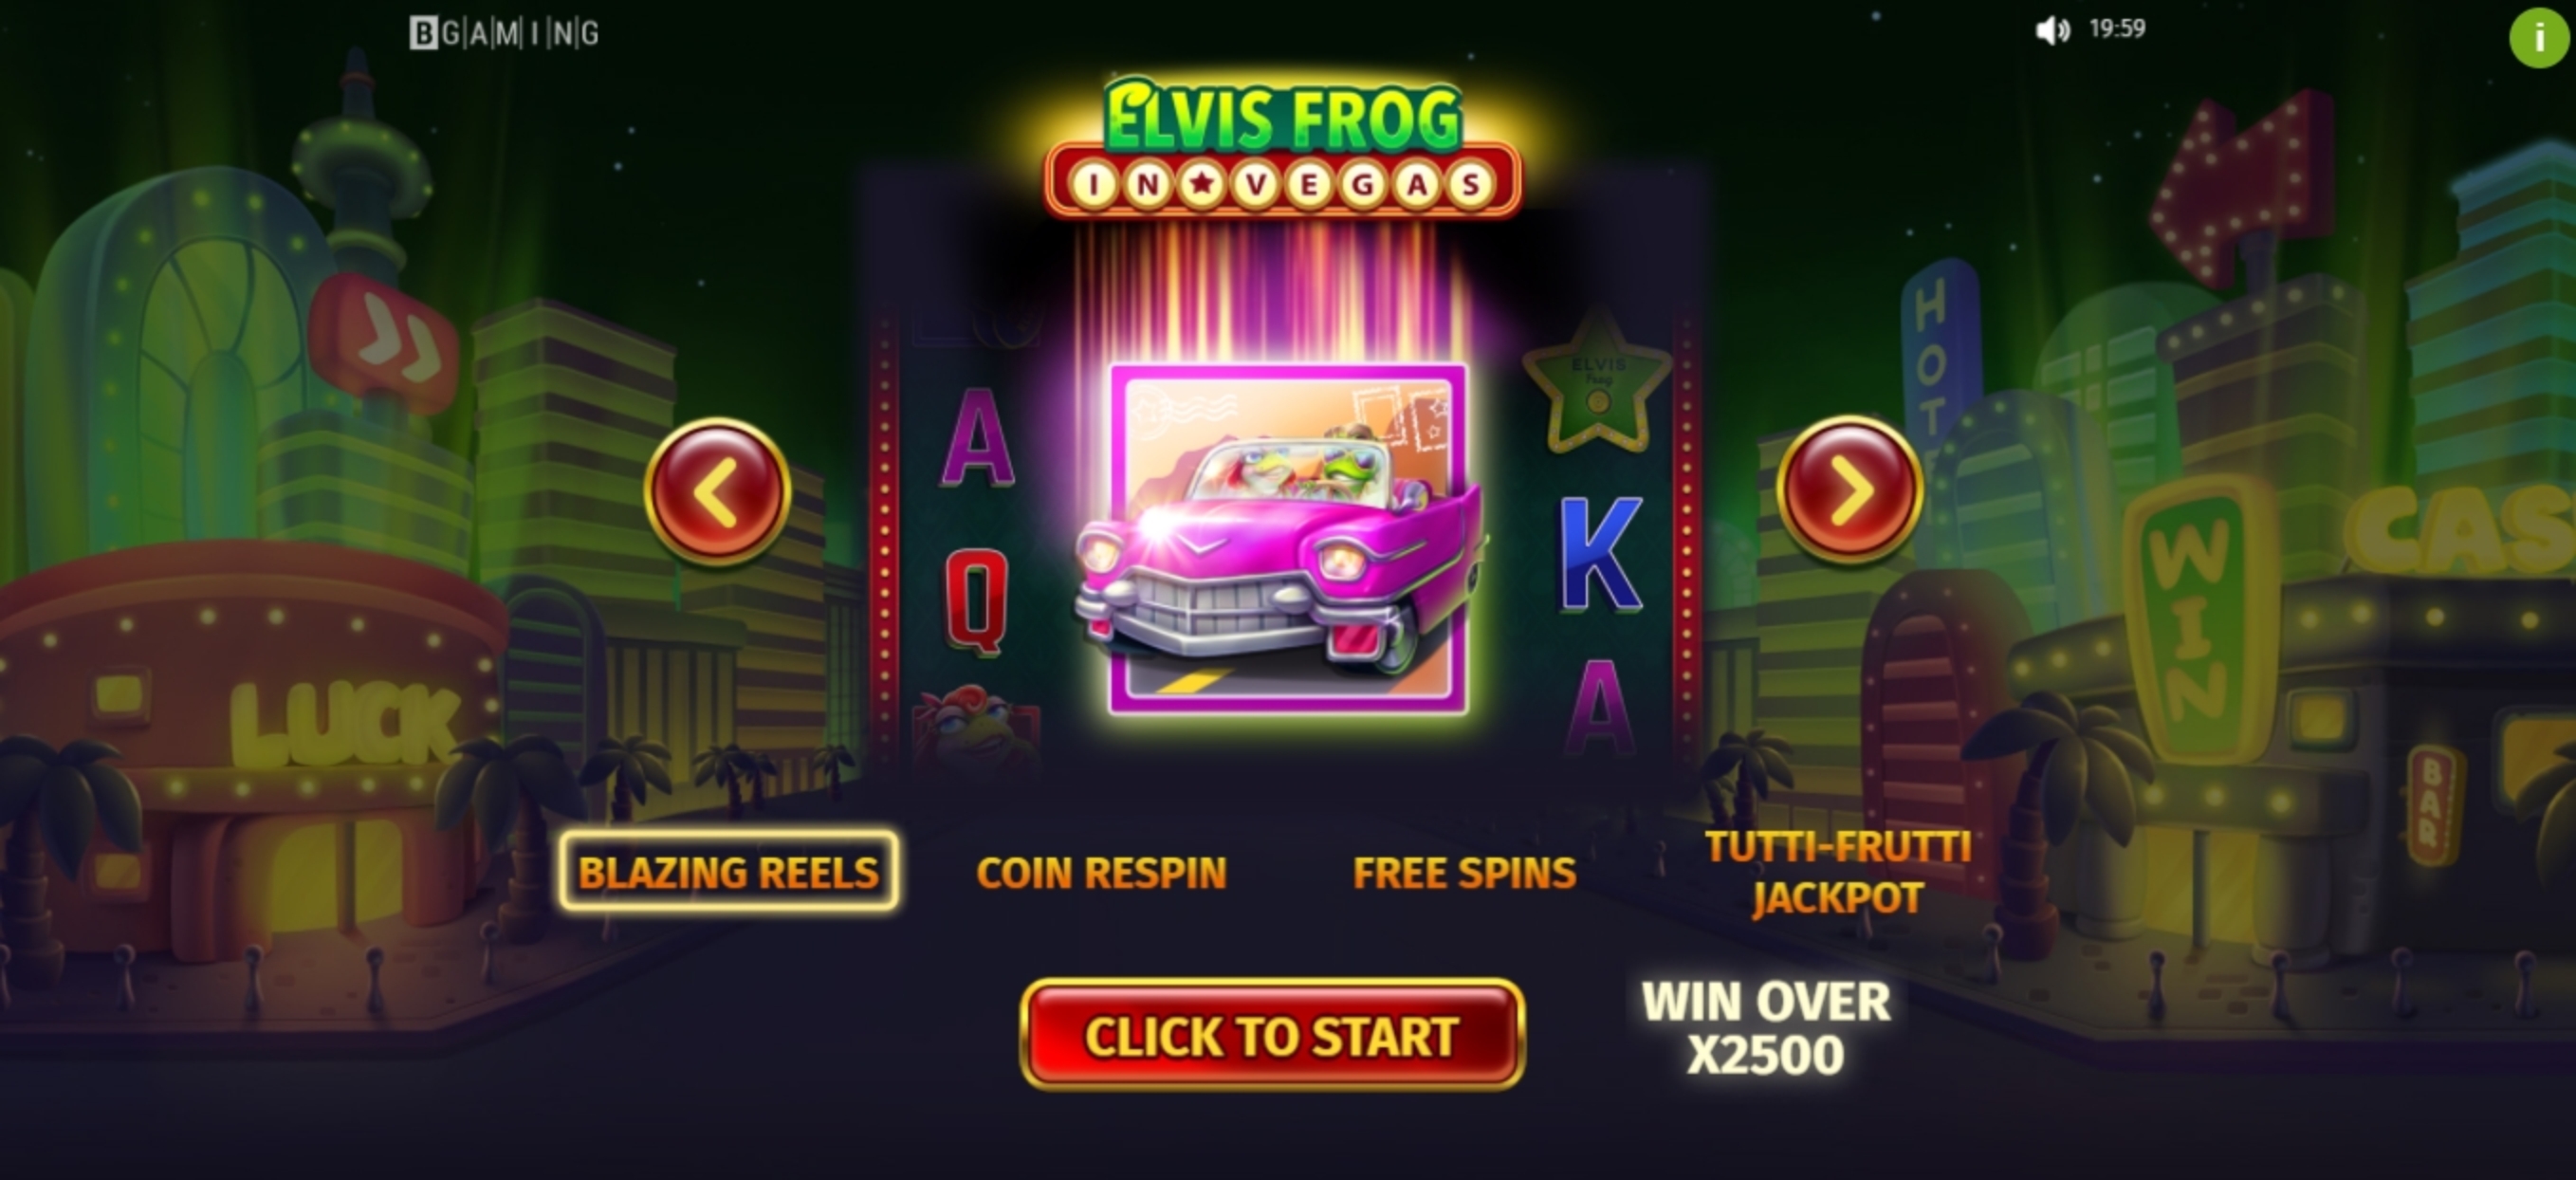 Play Elvis Frog in Vegas Free Casino Slot Game by BGAMING